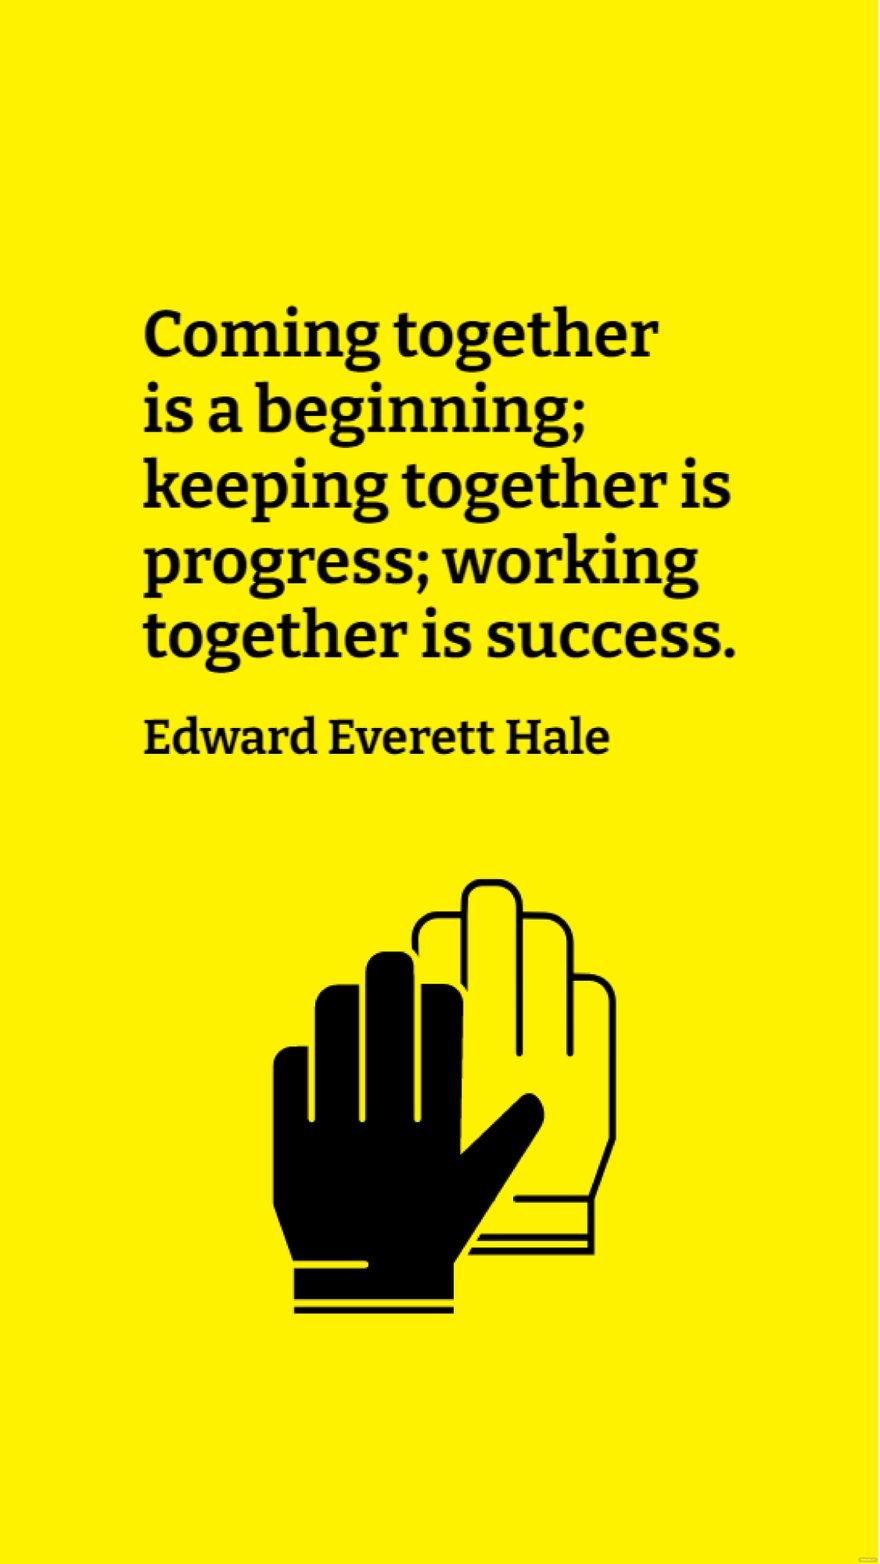 Edward Everett Hale - Coming together is a beginning; keeping together is progress; working together is success.